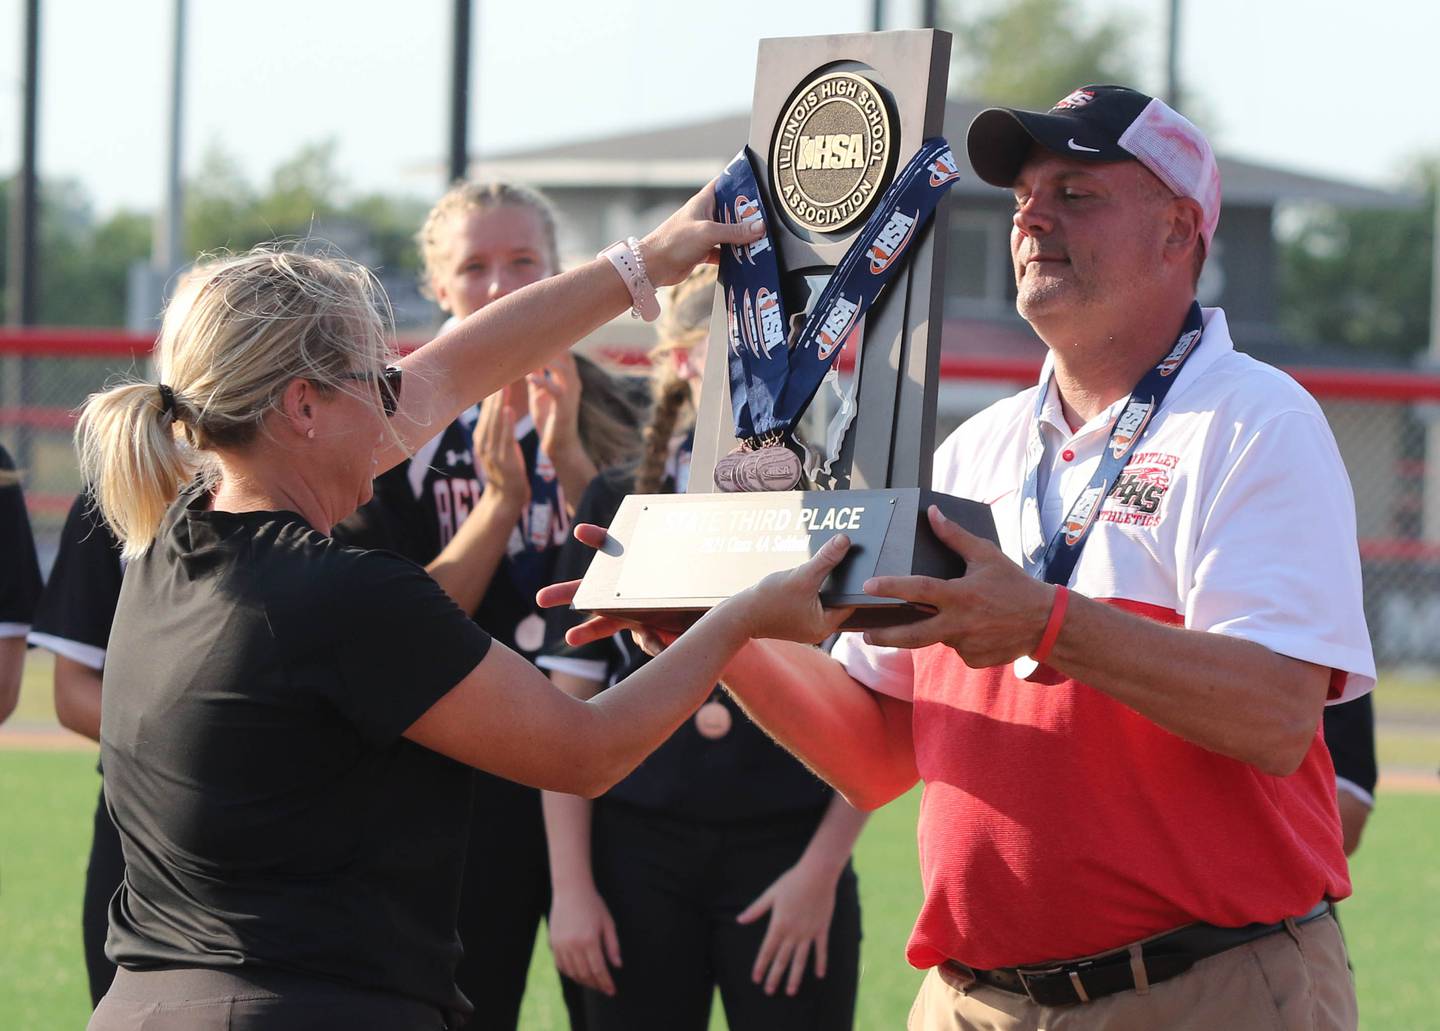 Huntley coach Mark Petryniec accepts the trophy after winning the IHSA Class 4A third-place game June 17 over Minooka at the Louisville Slugger Sports Complex in Peoria.